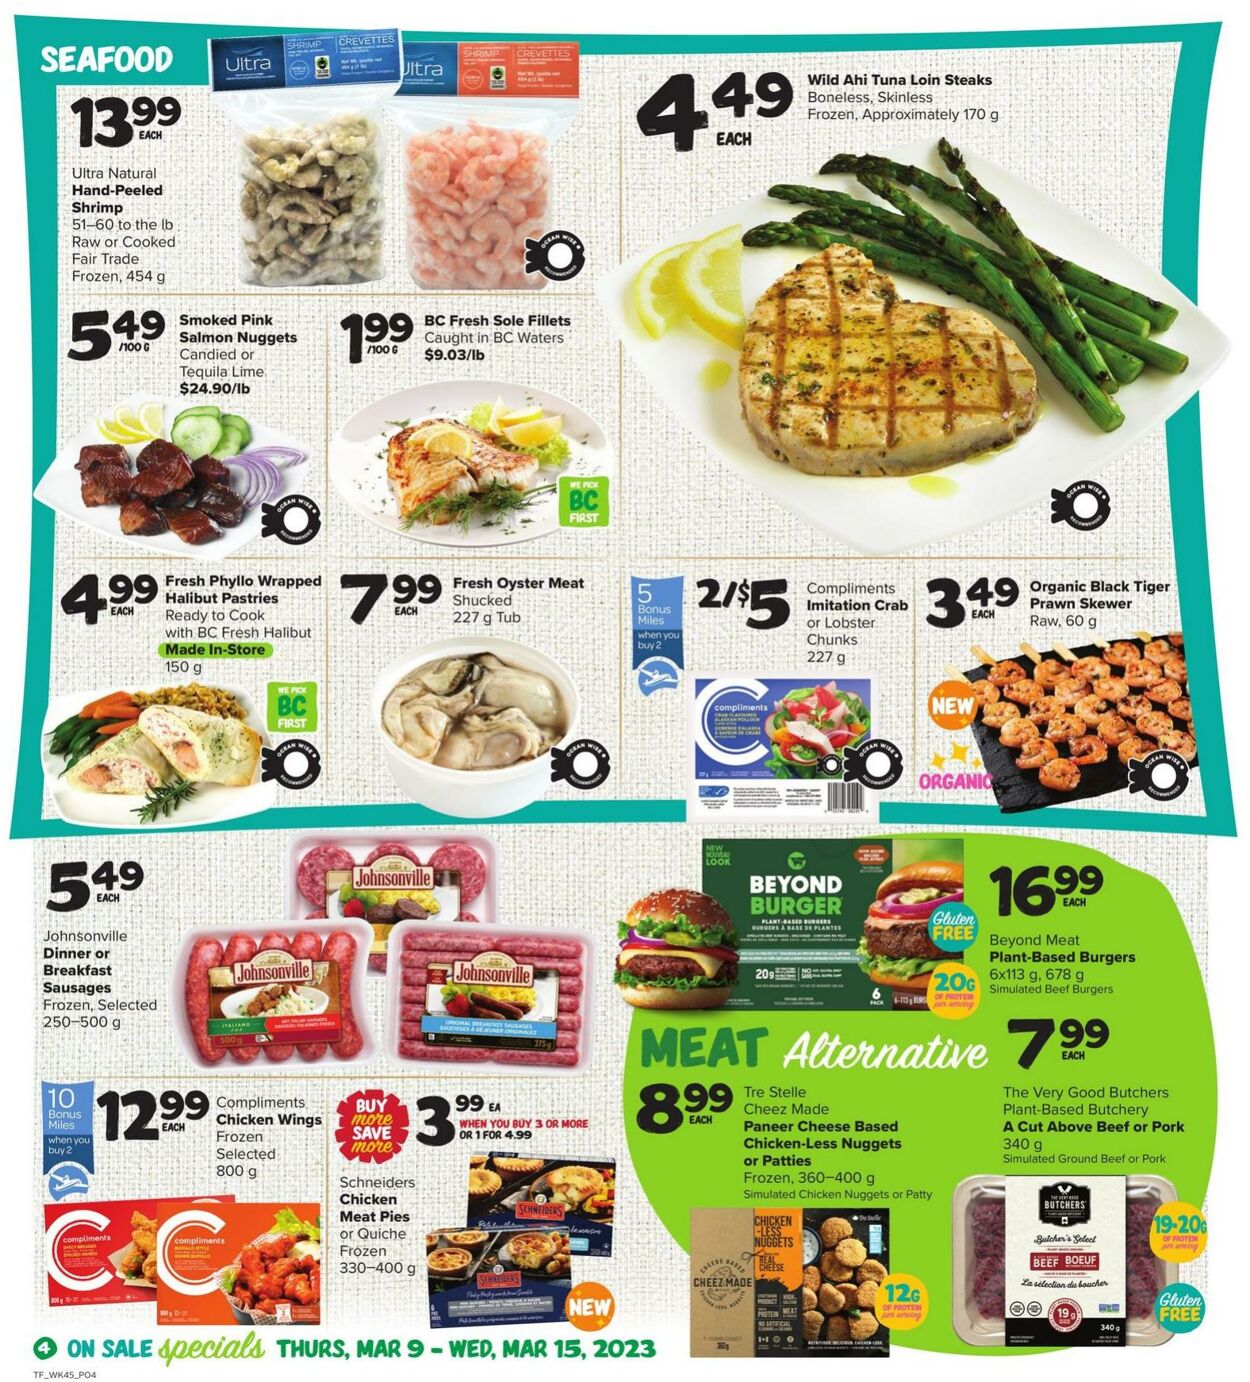 Circulaire Thrifty Foods 09.03.2023 - 15.03.2023